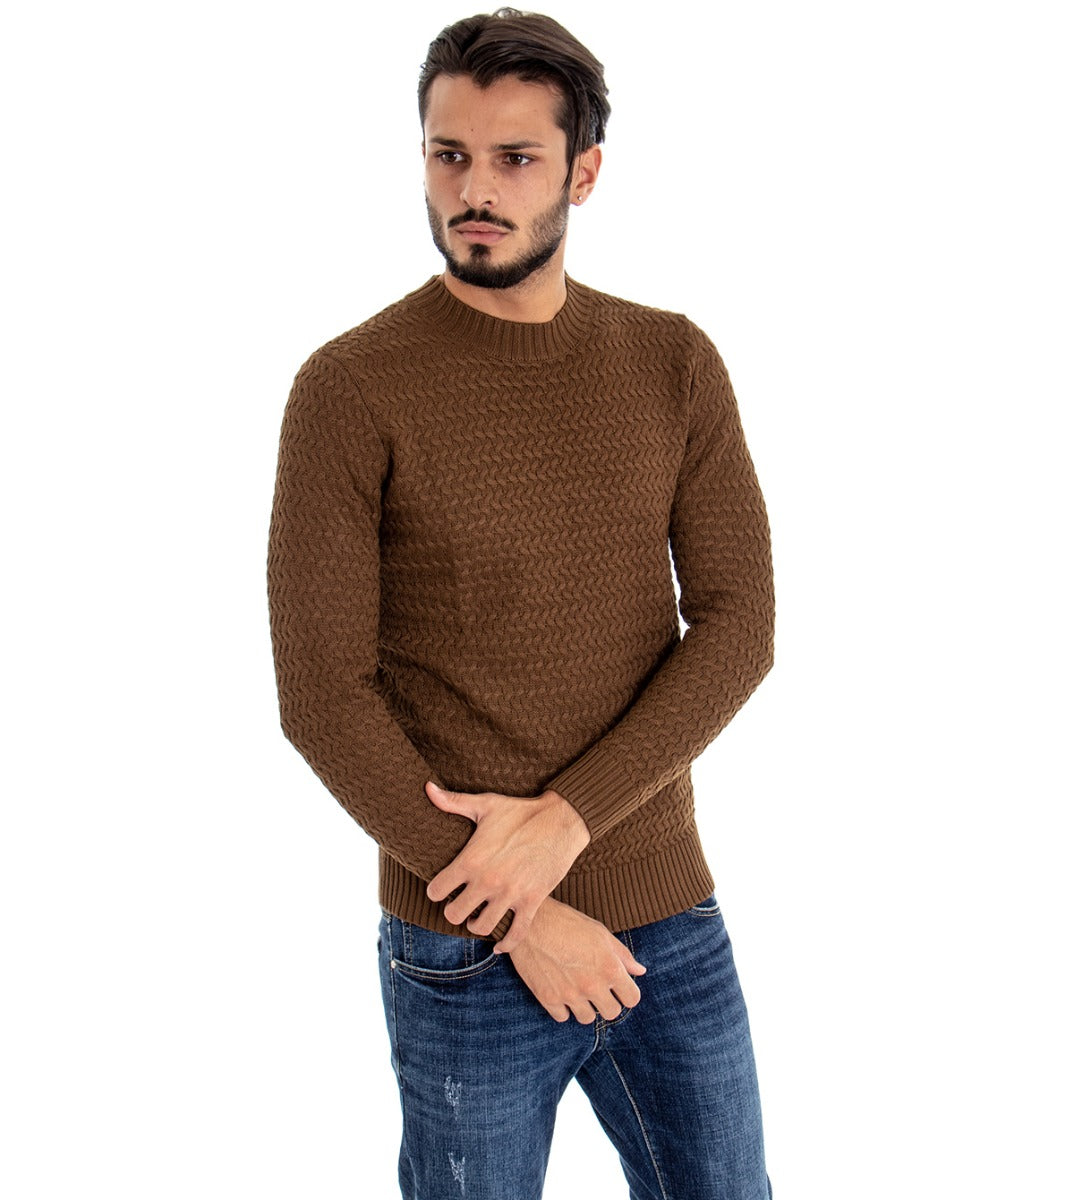 Men's Crew Neck Sweater Camel Woven Patterned Sweater Casual Long Sleeves GIOSAL